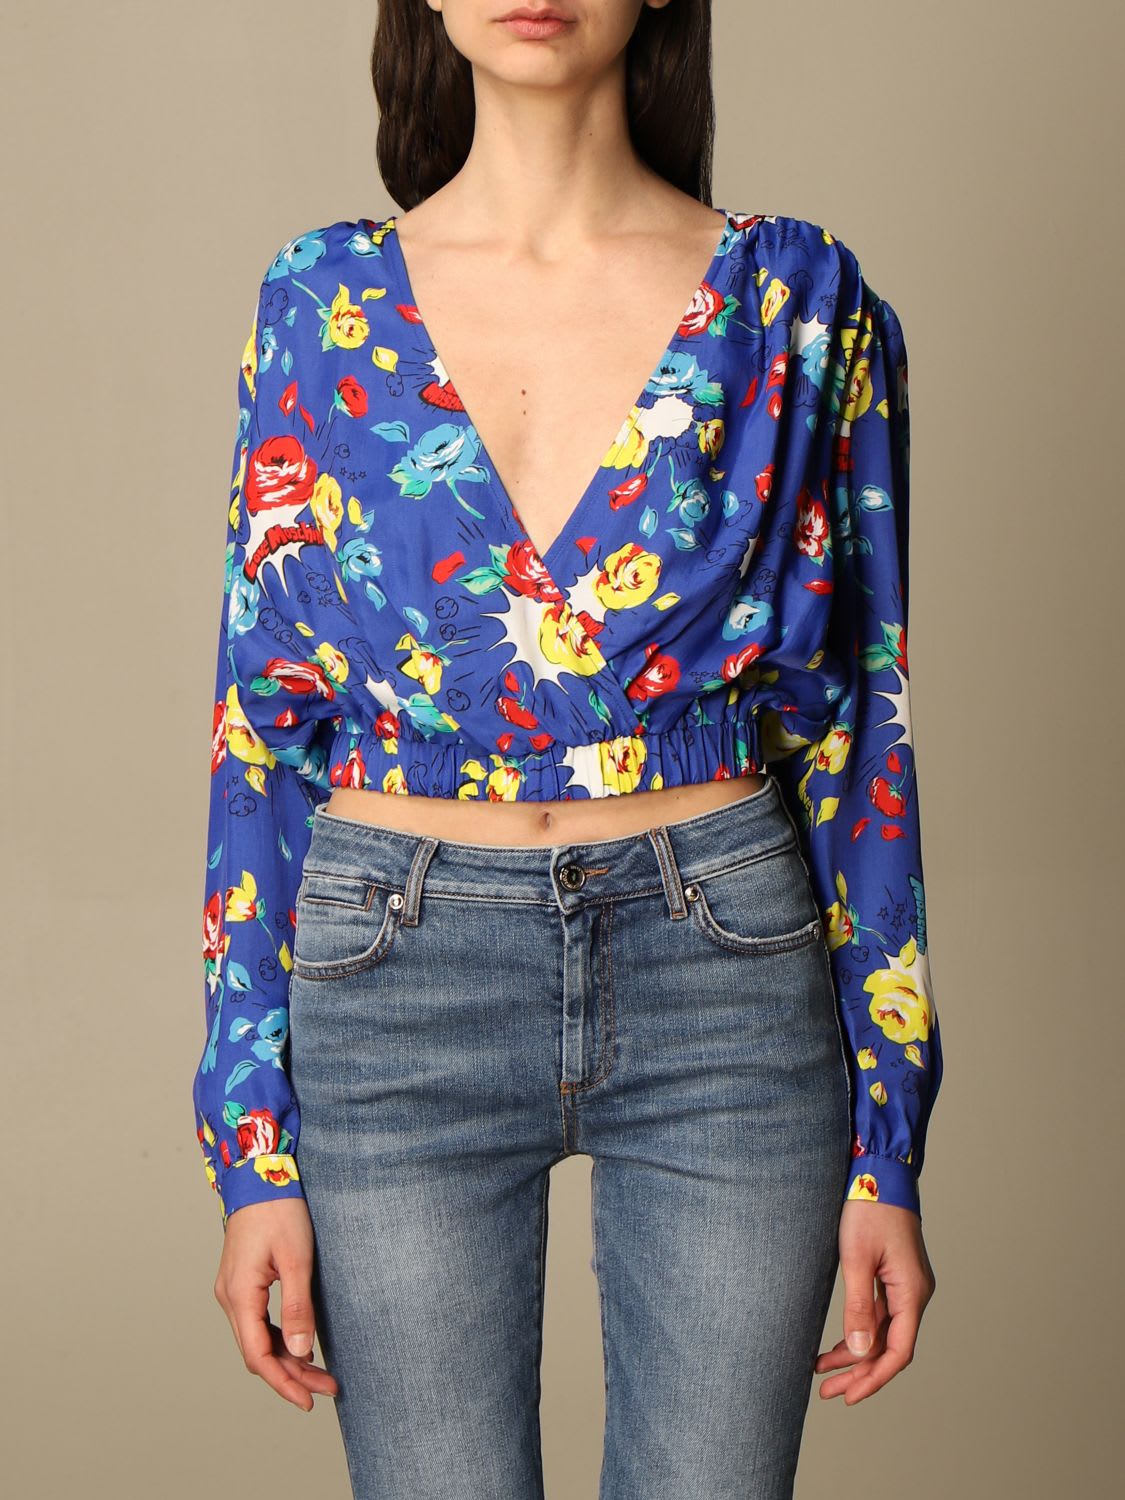 Love Moschino Top Loved Moschino Cropped Blouse With Floral Pattern